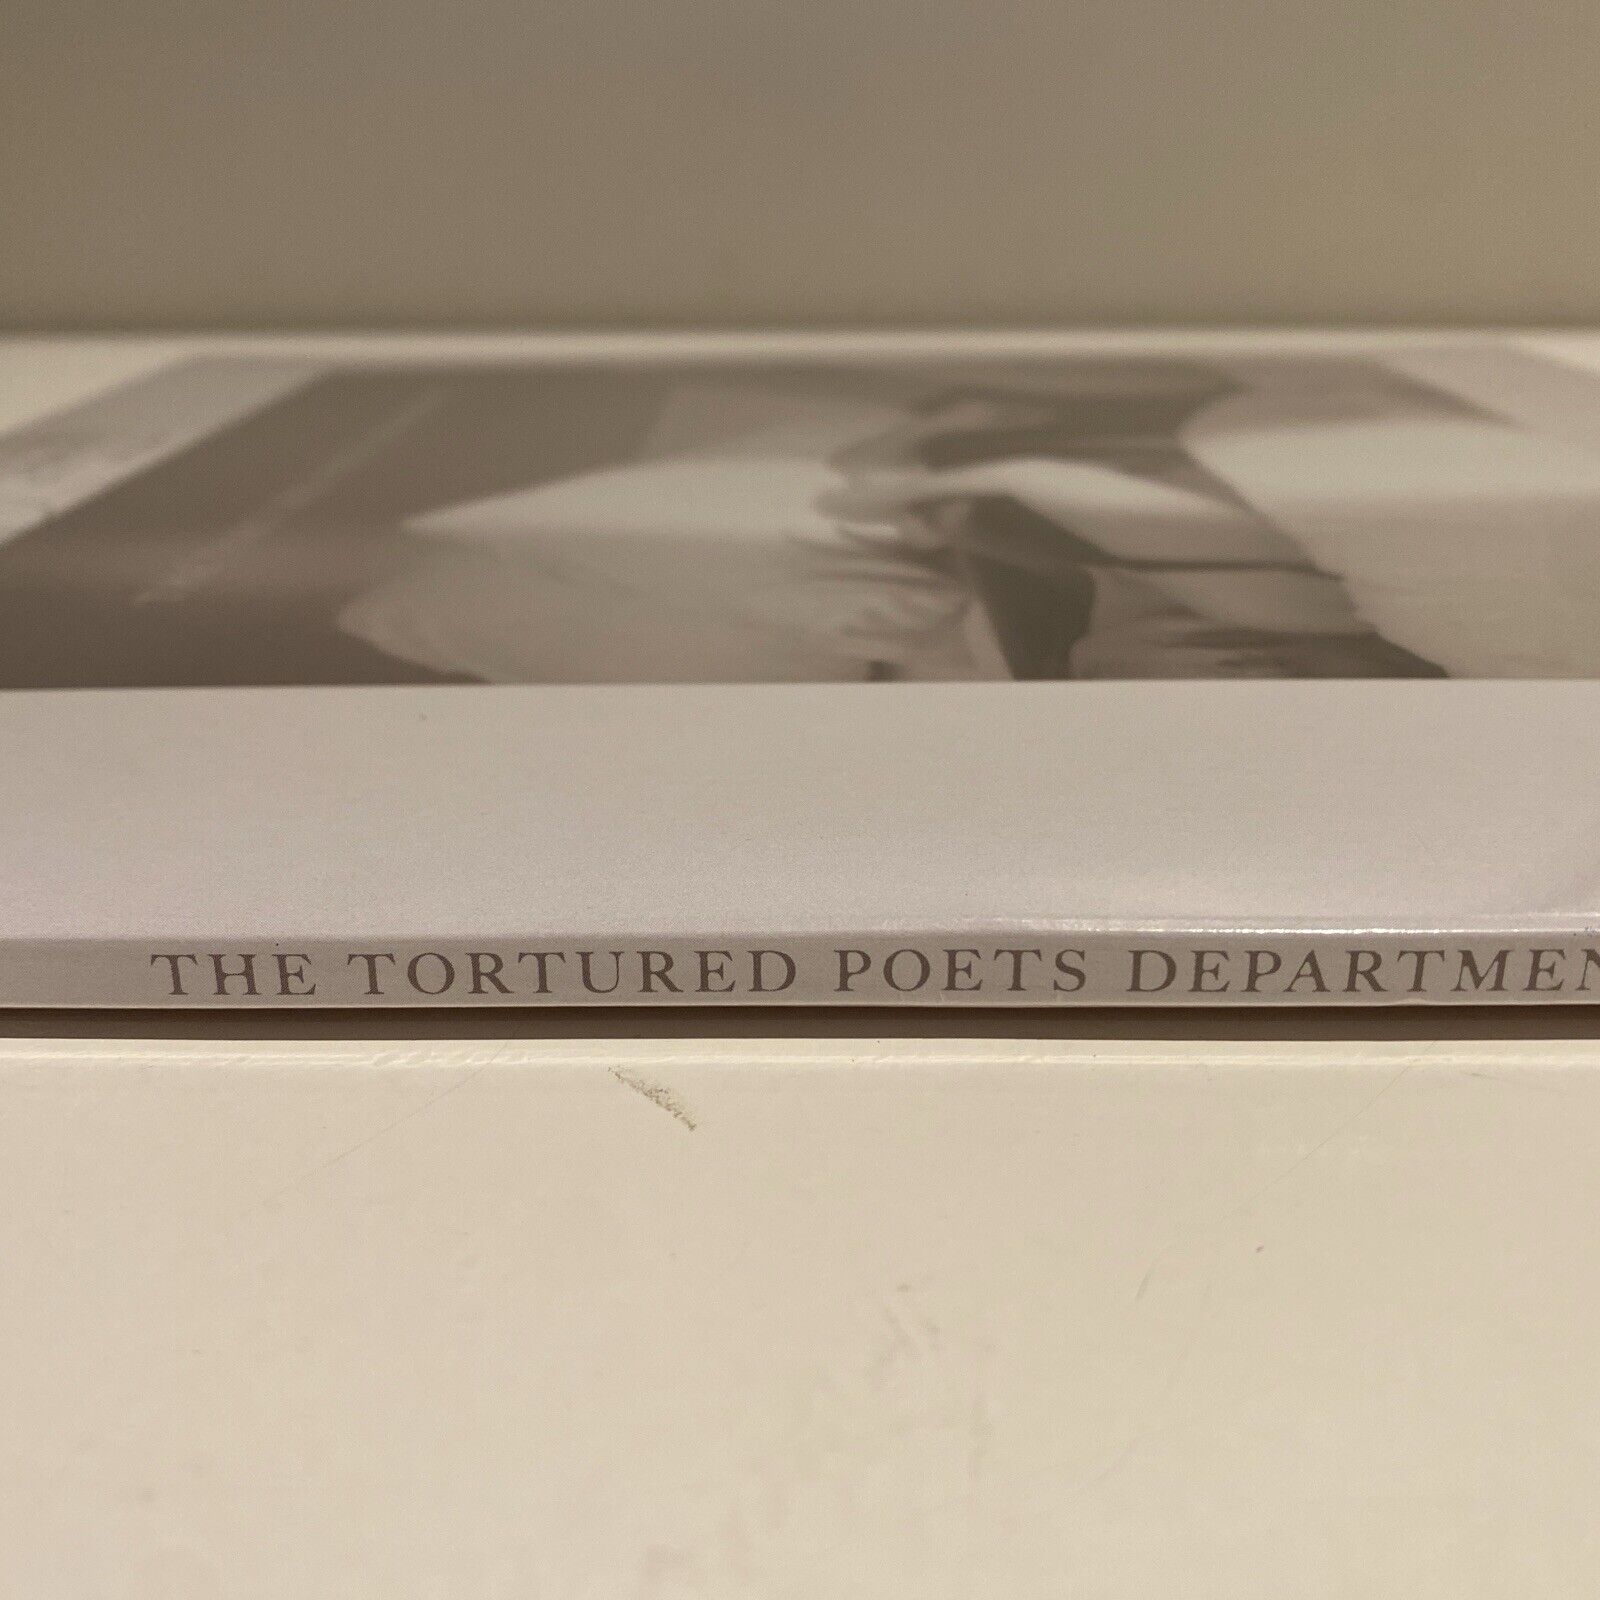 Taylor Swift Tortured Poets Department GHOST WHITE Vinyl Record LP.  New